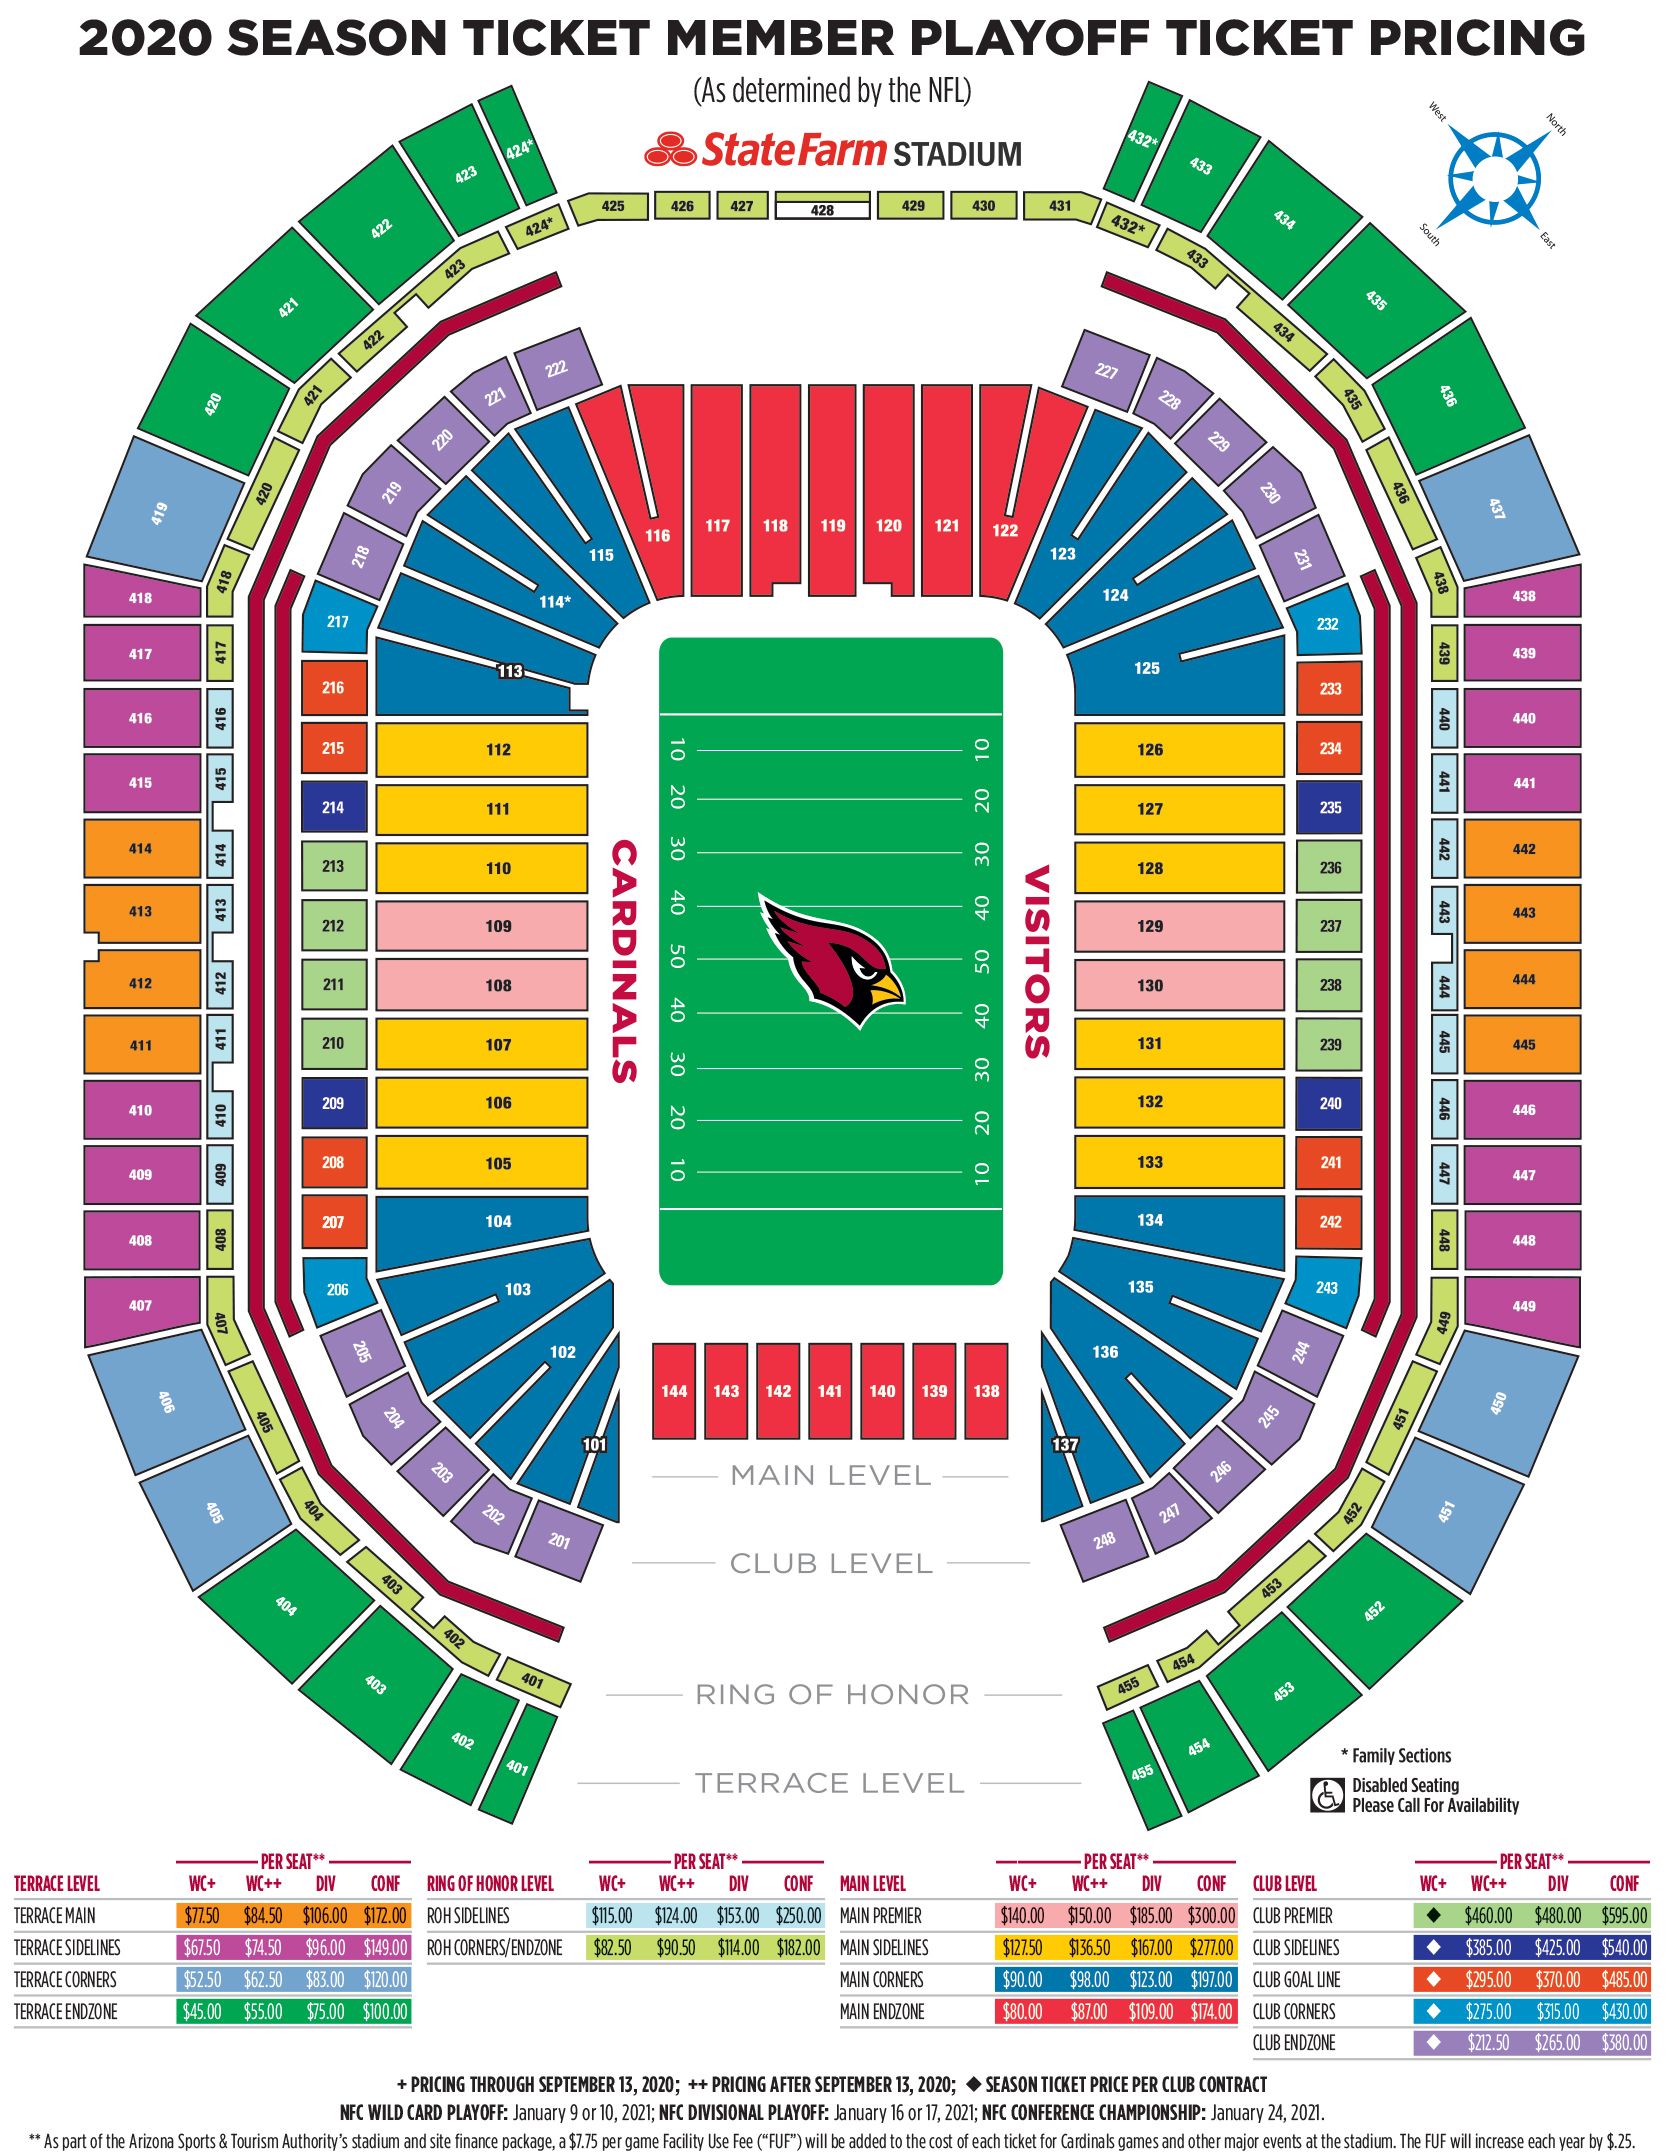 Cardinals playoff tickets to go on sale Friday